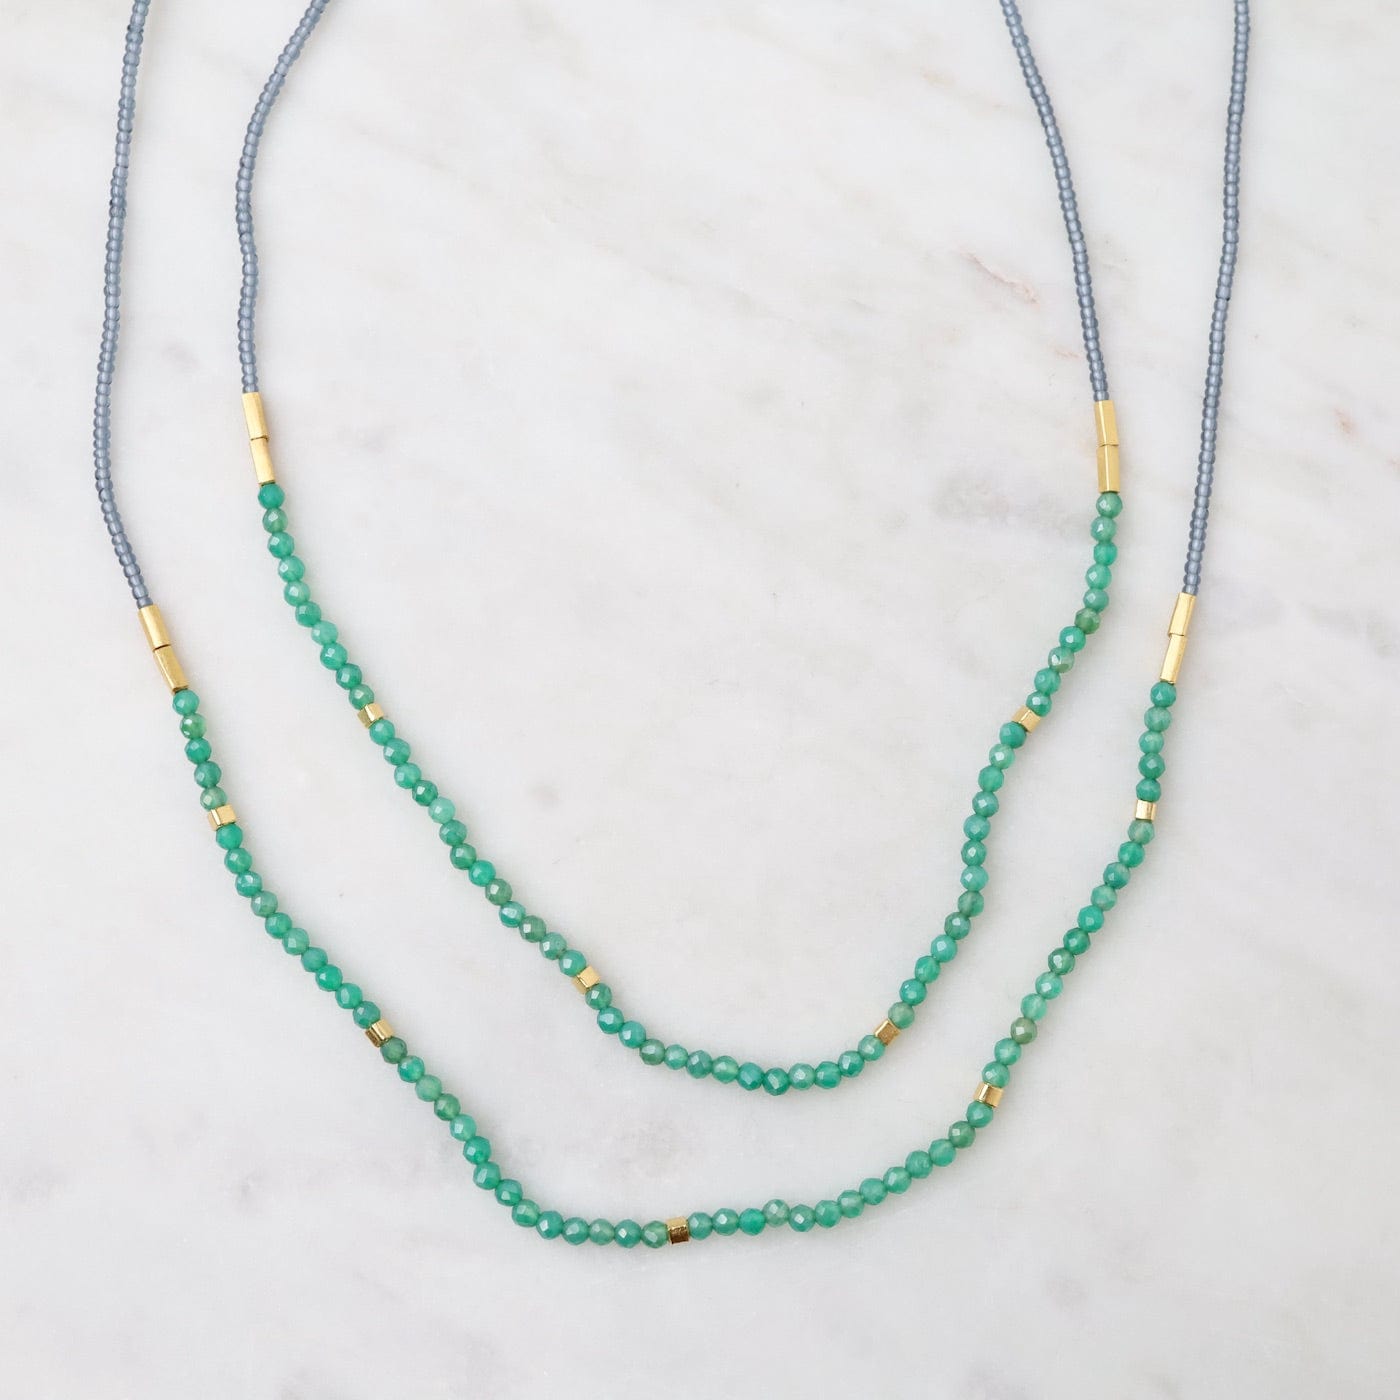 NKL Grey, Green Onyx & Gold Vermeil Beaded Necklace